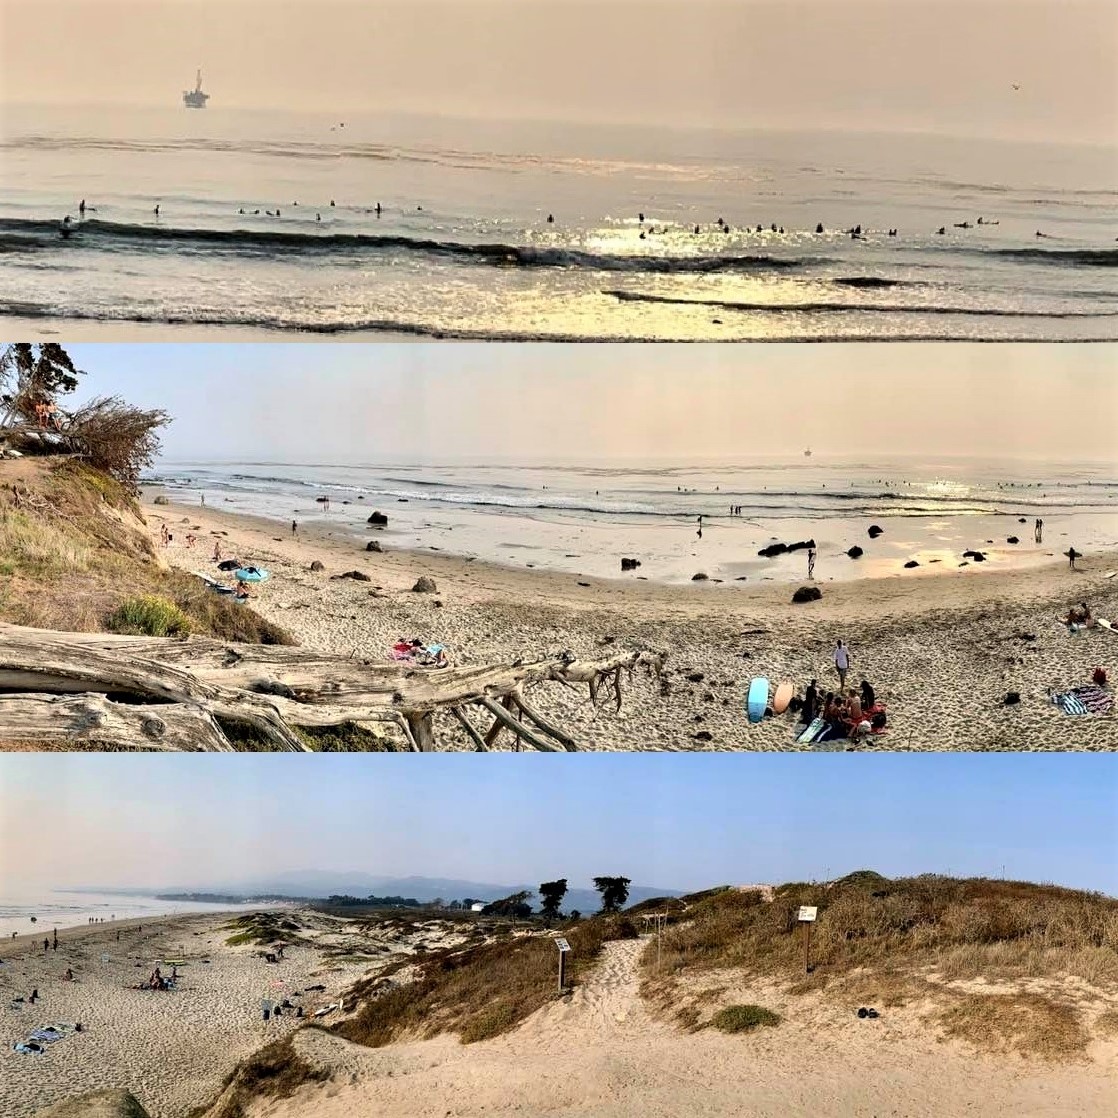 Three panoramic photos I took at Goleta's Coal Oil Point Beach this afternoon